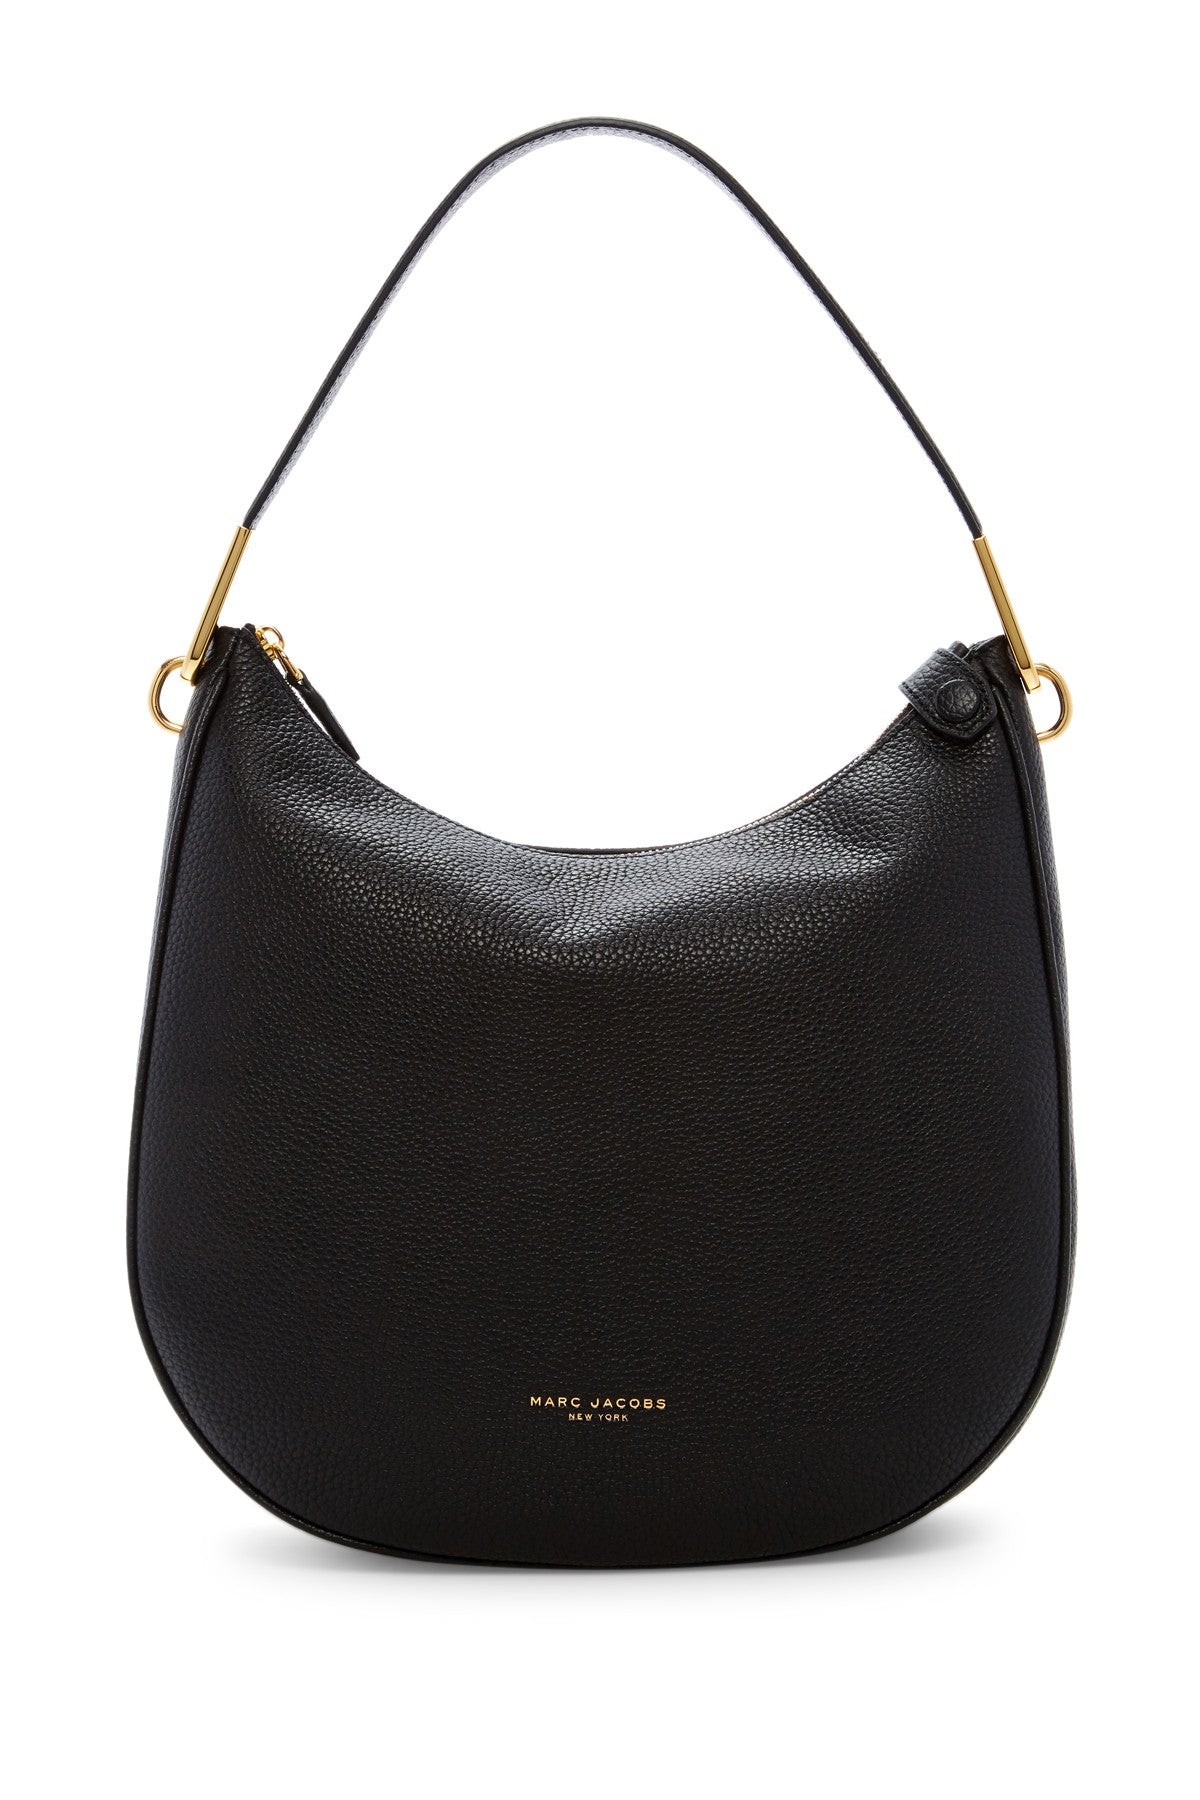 Marc Jacobs The Essential Leather Hobo – Pit-a-Pats.com